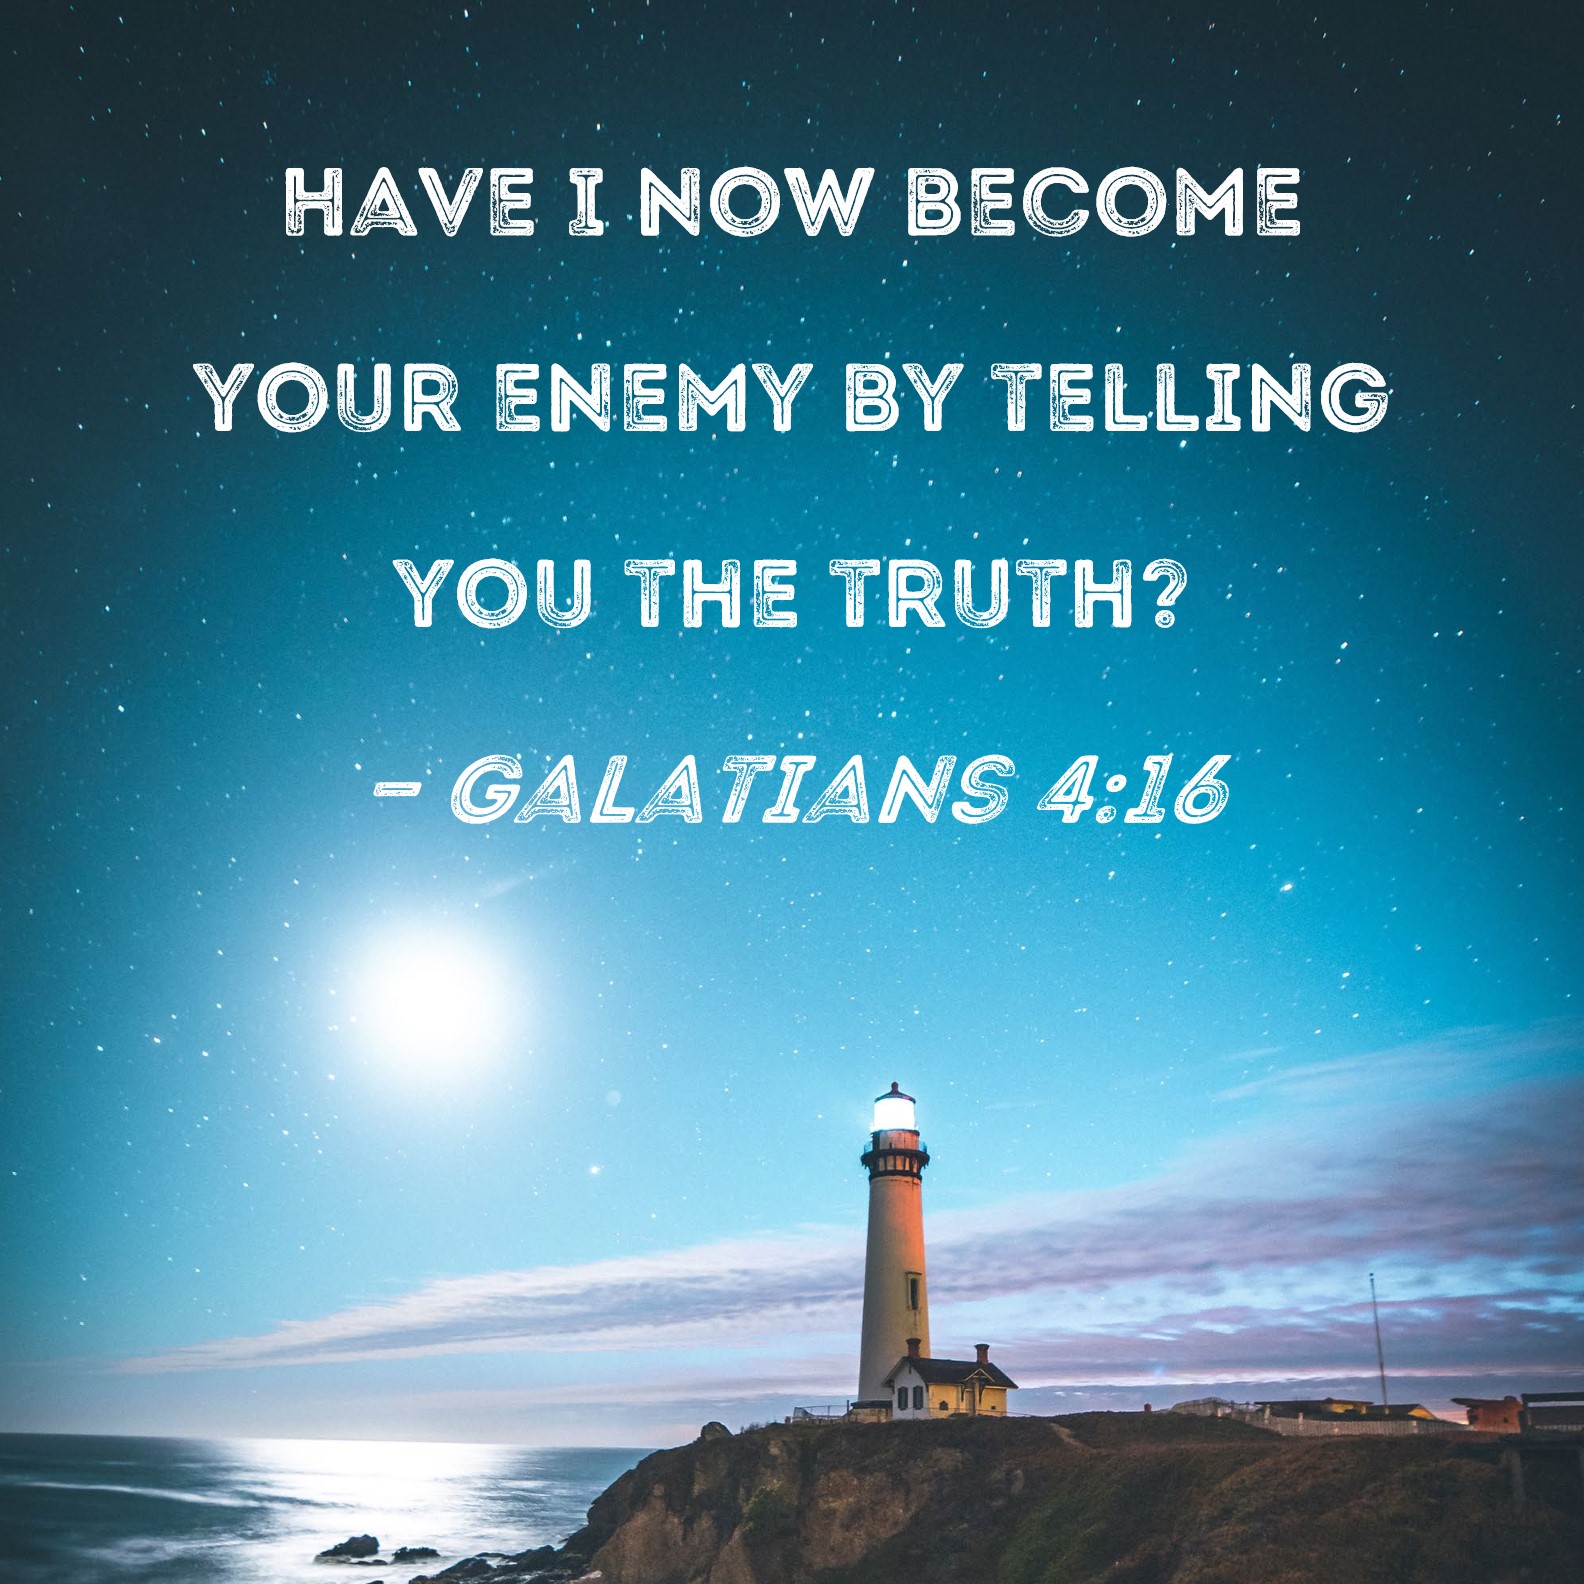 galatians-4-16-have-i-now-become-your-enemy-by-telling-you-the-truth